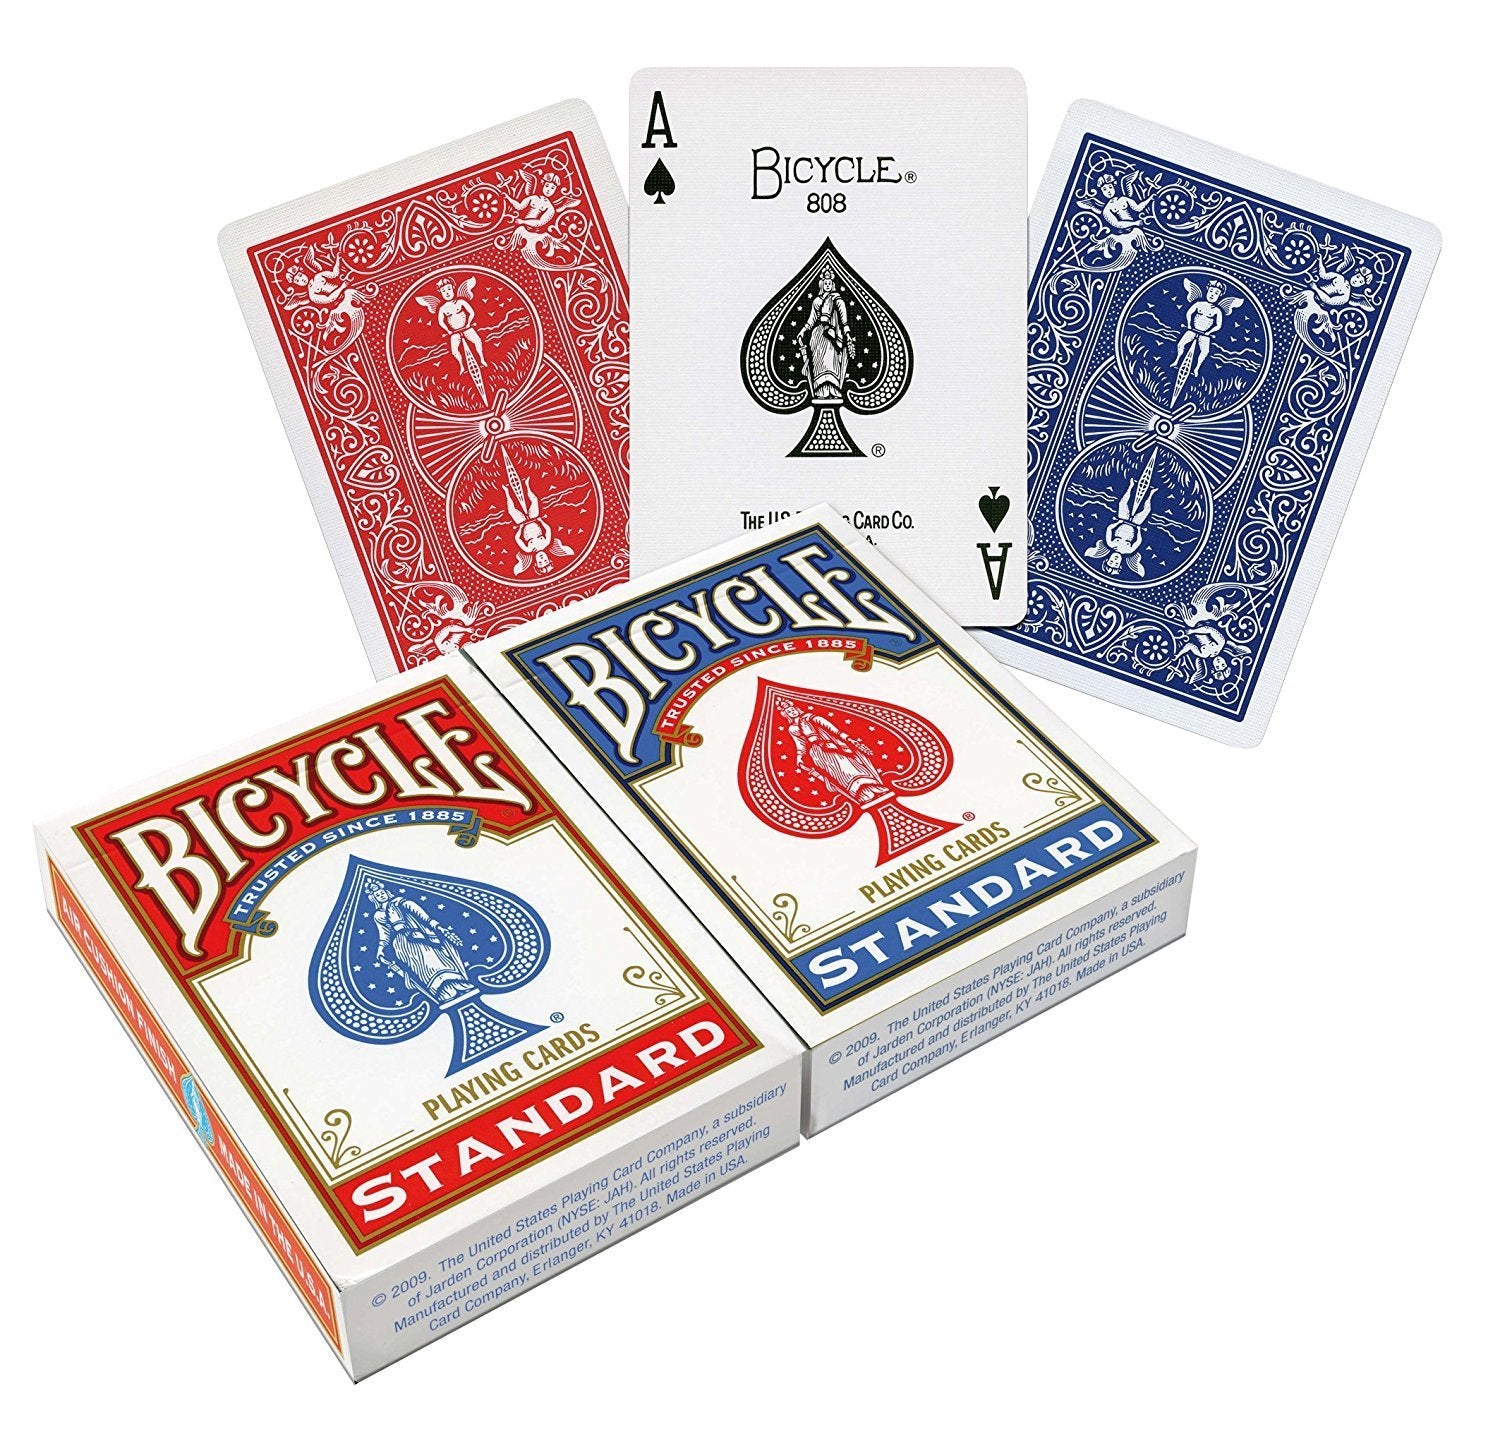 Standard Bicycle playing cards with a spade design on the cover. Can purchase either red or blue package that comes with the respective color on the back of playing cards.